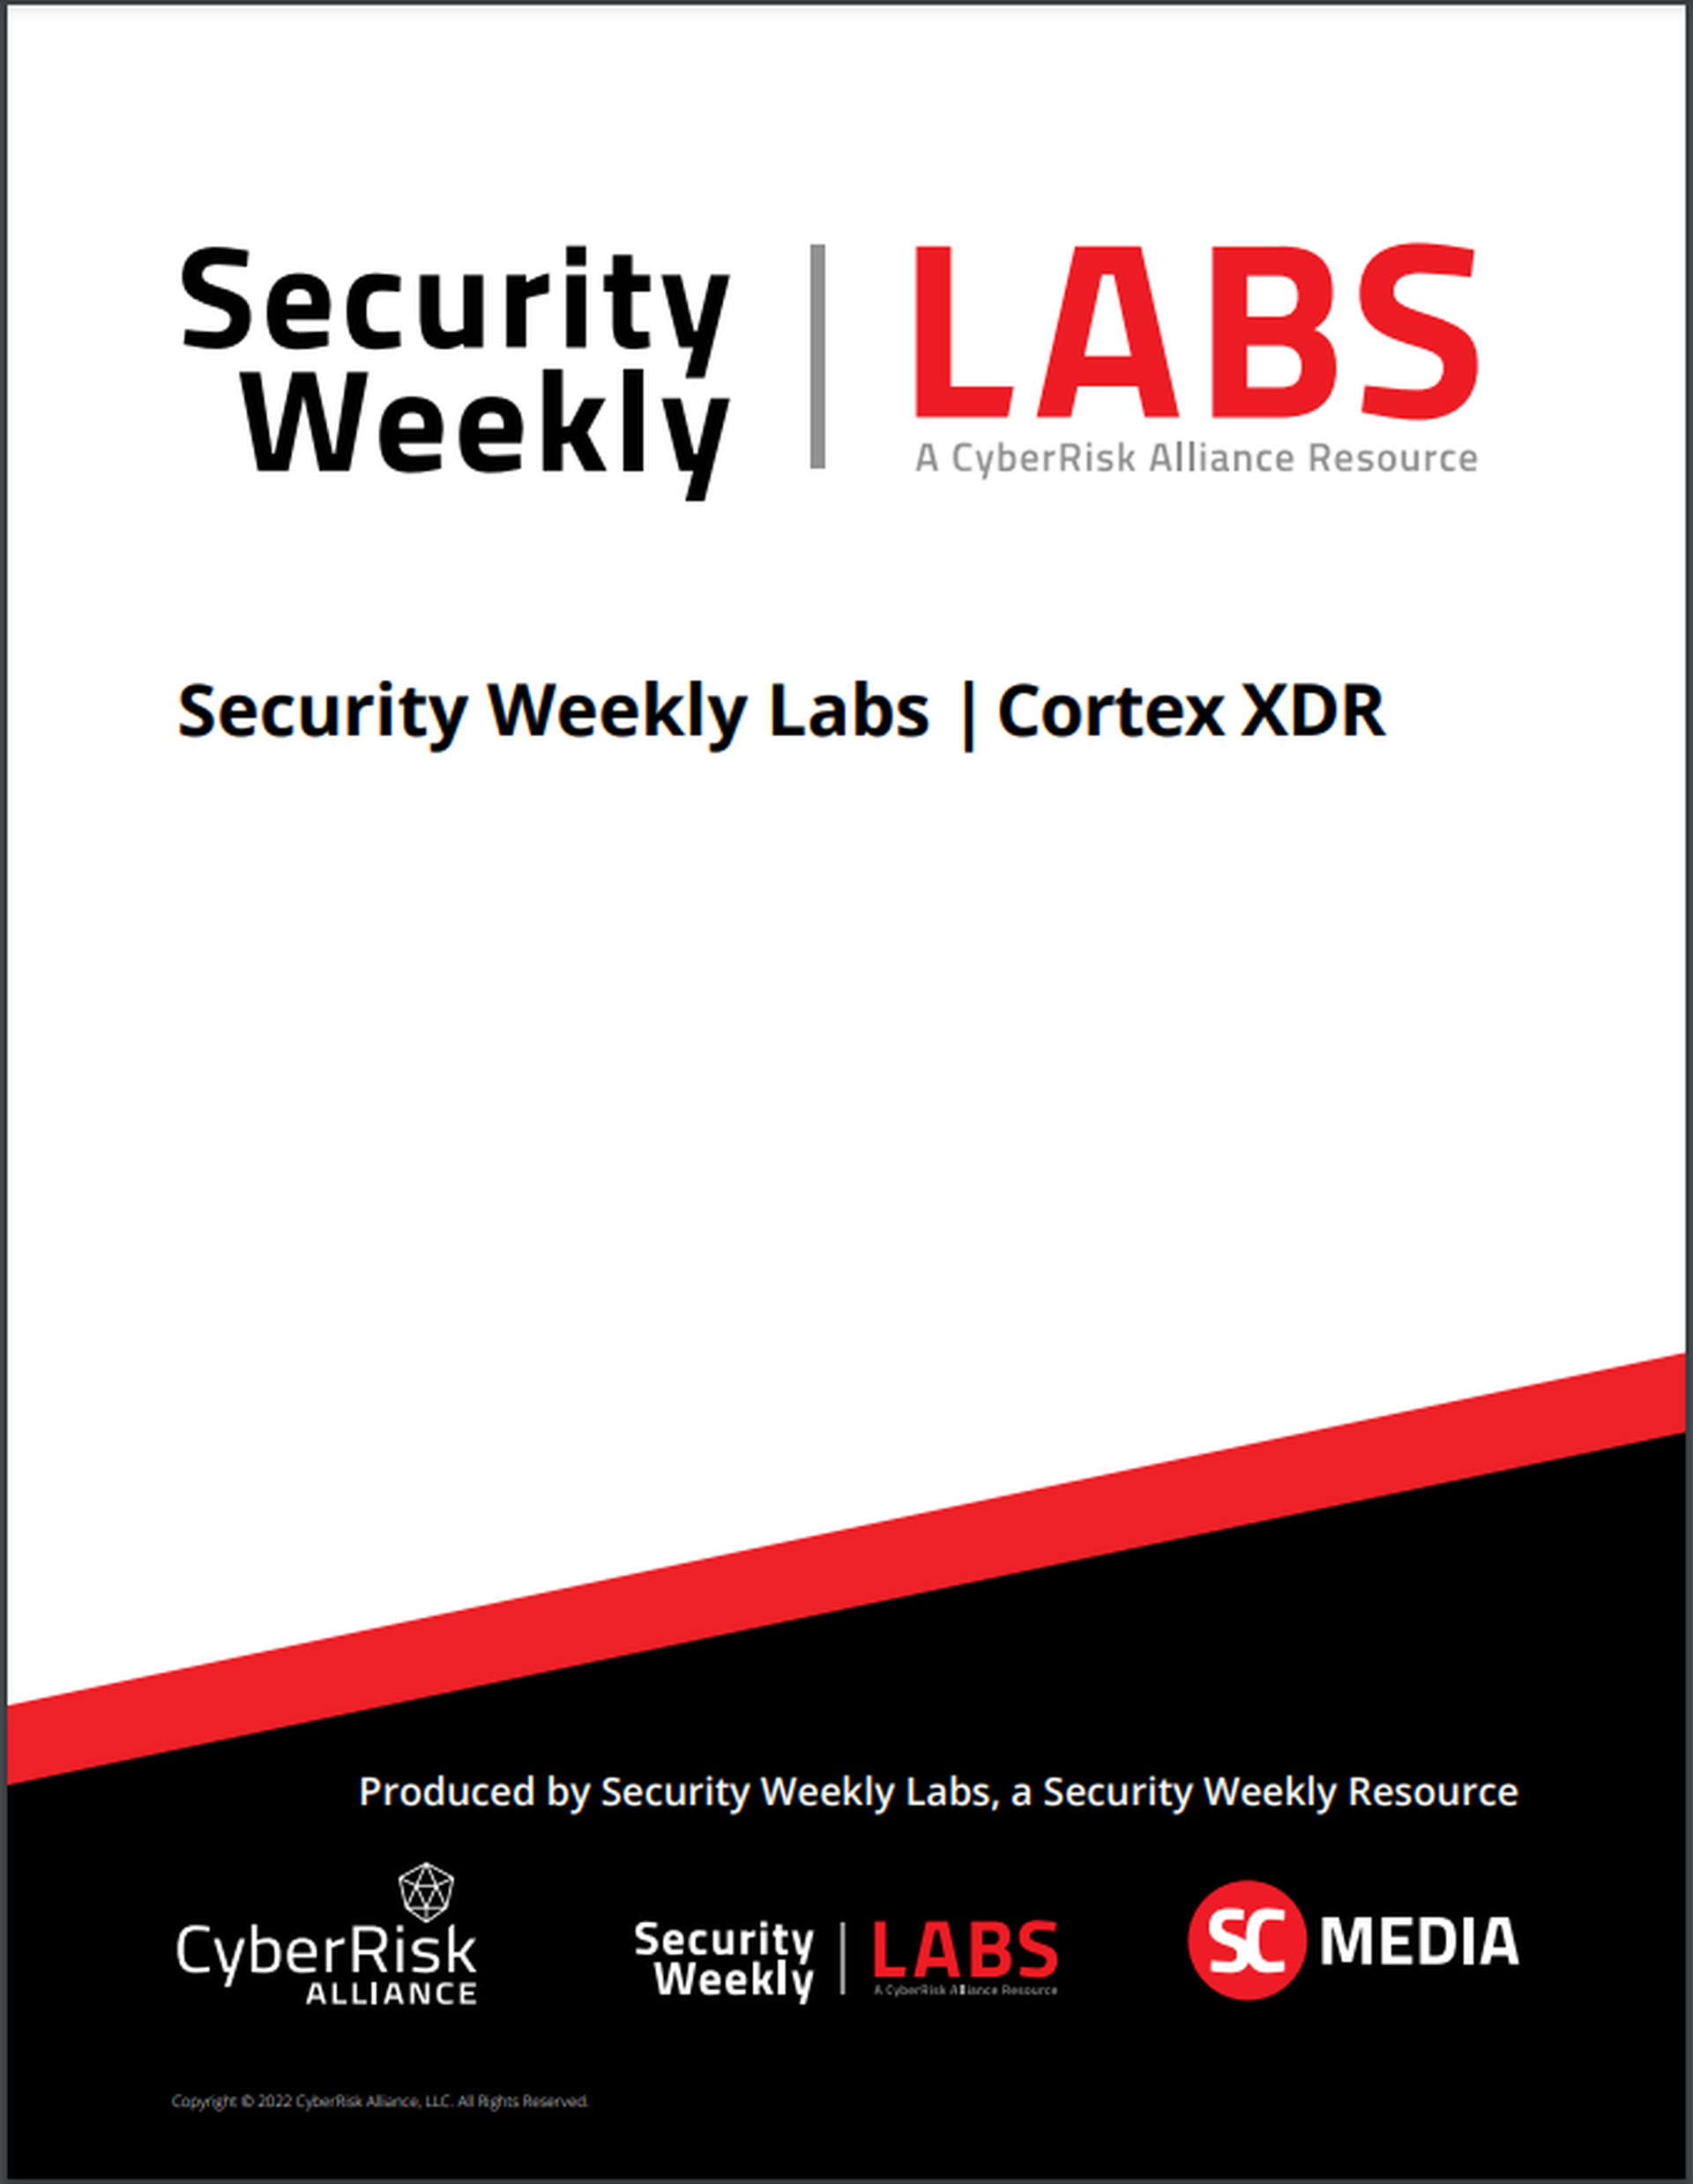 SecurityWeekly Labs Review: Cortex XDR